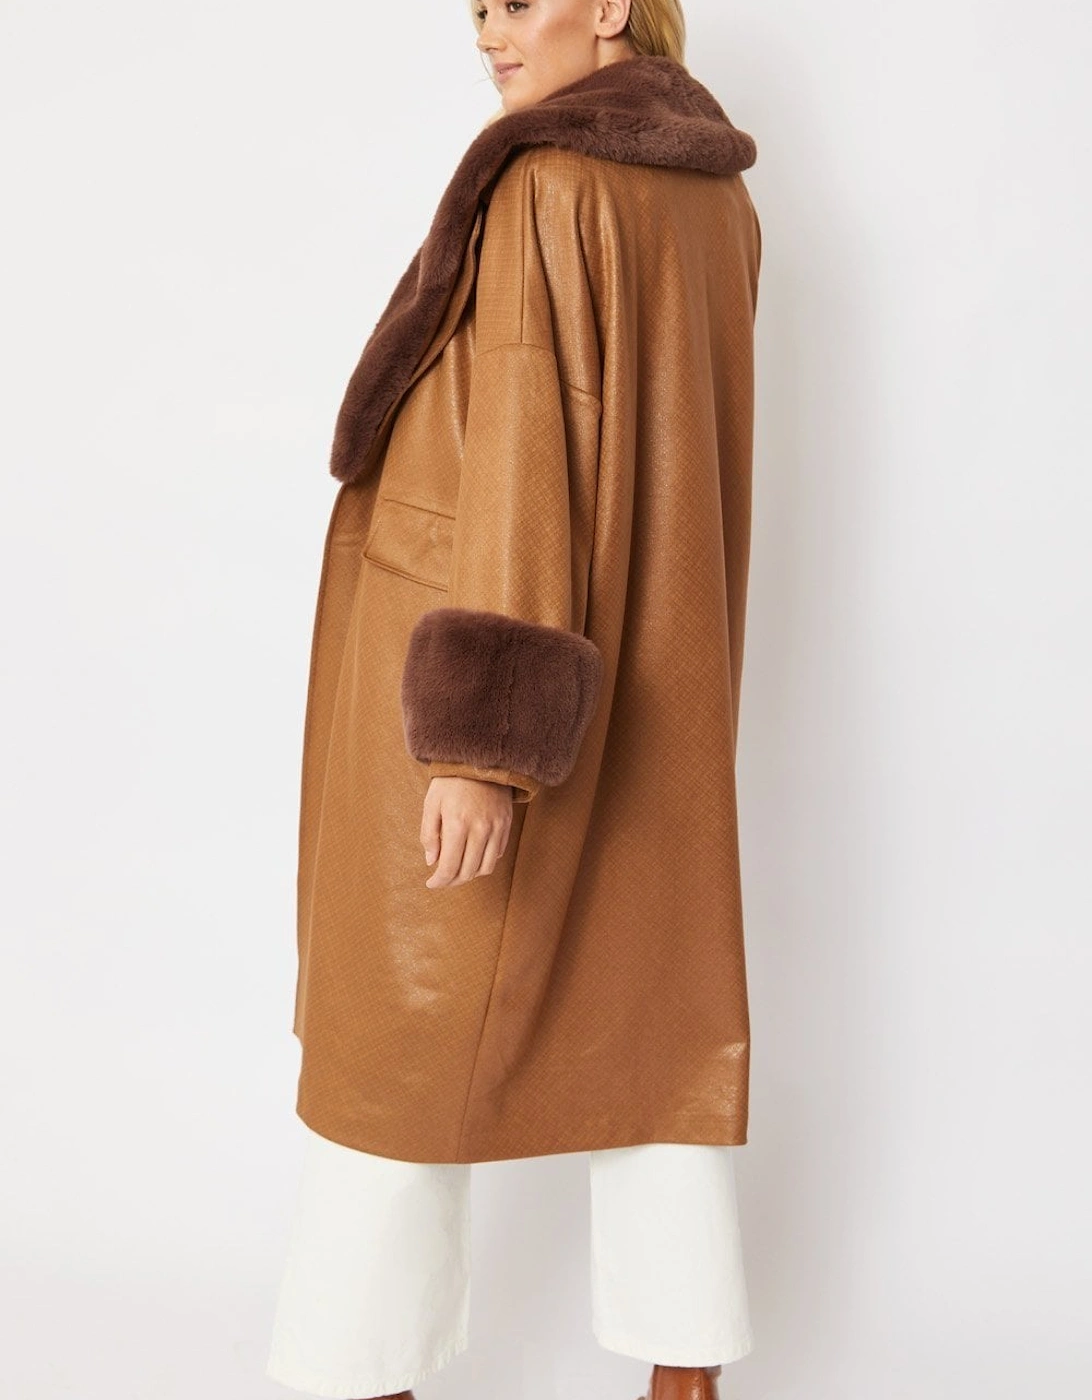 Brown Oversized Faux Suede Jacket With Detachable Faux Fur Cuffs & Collar